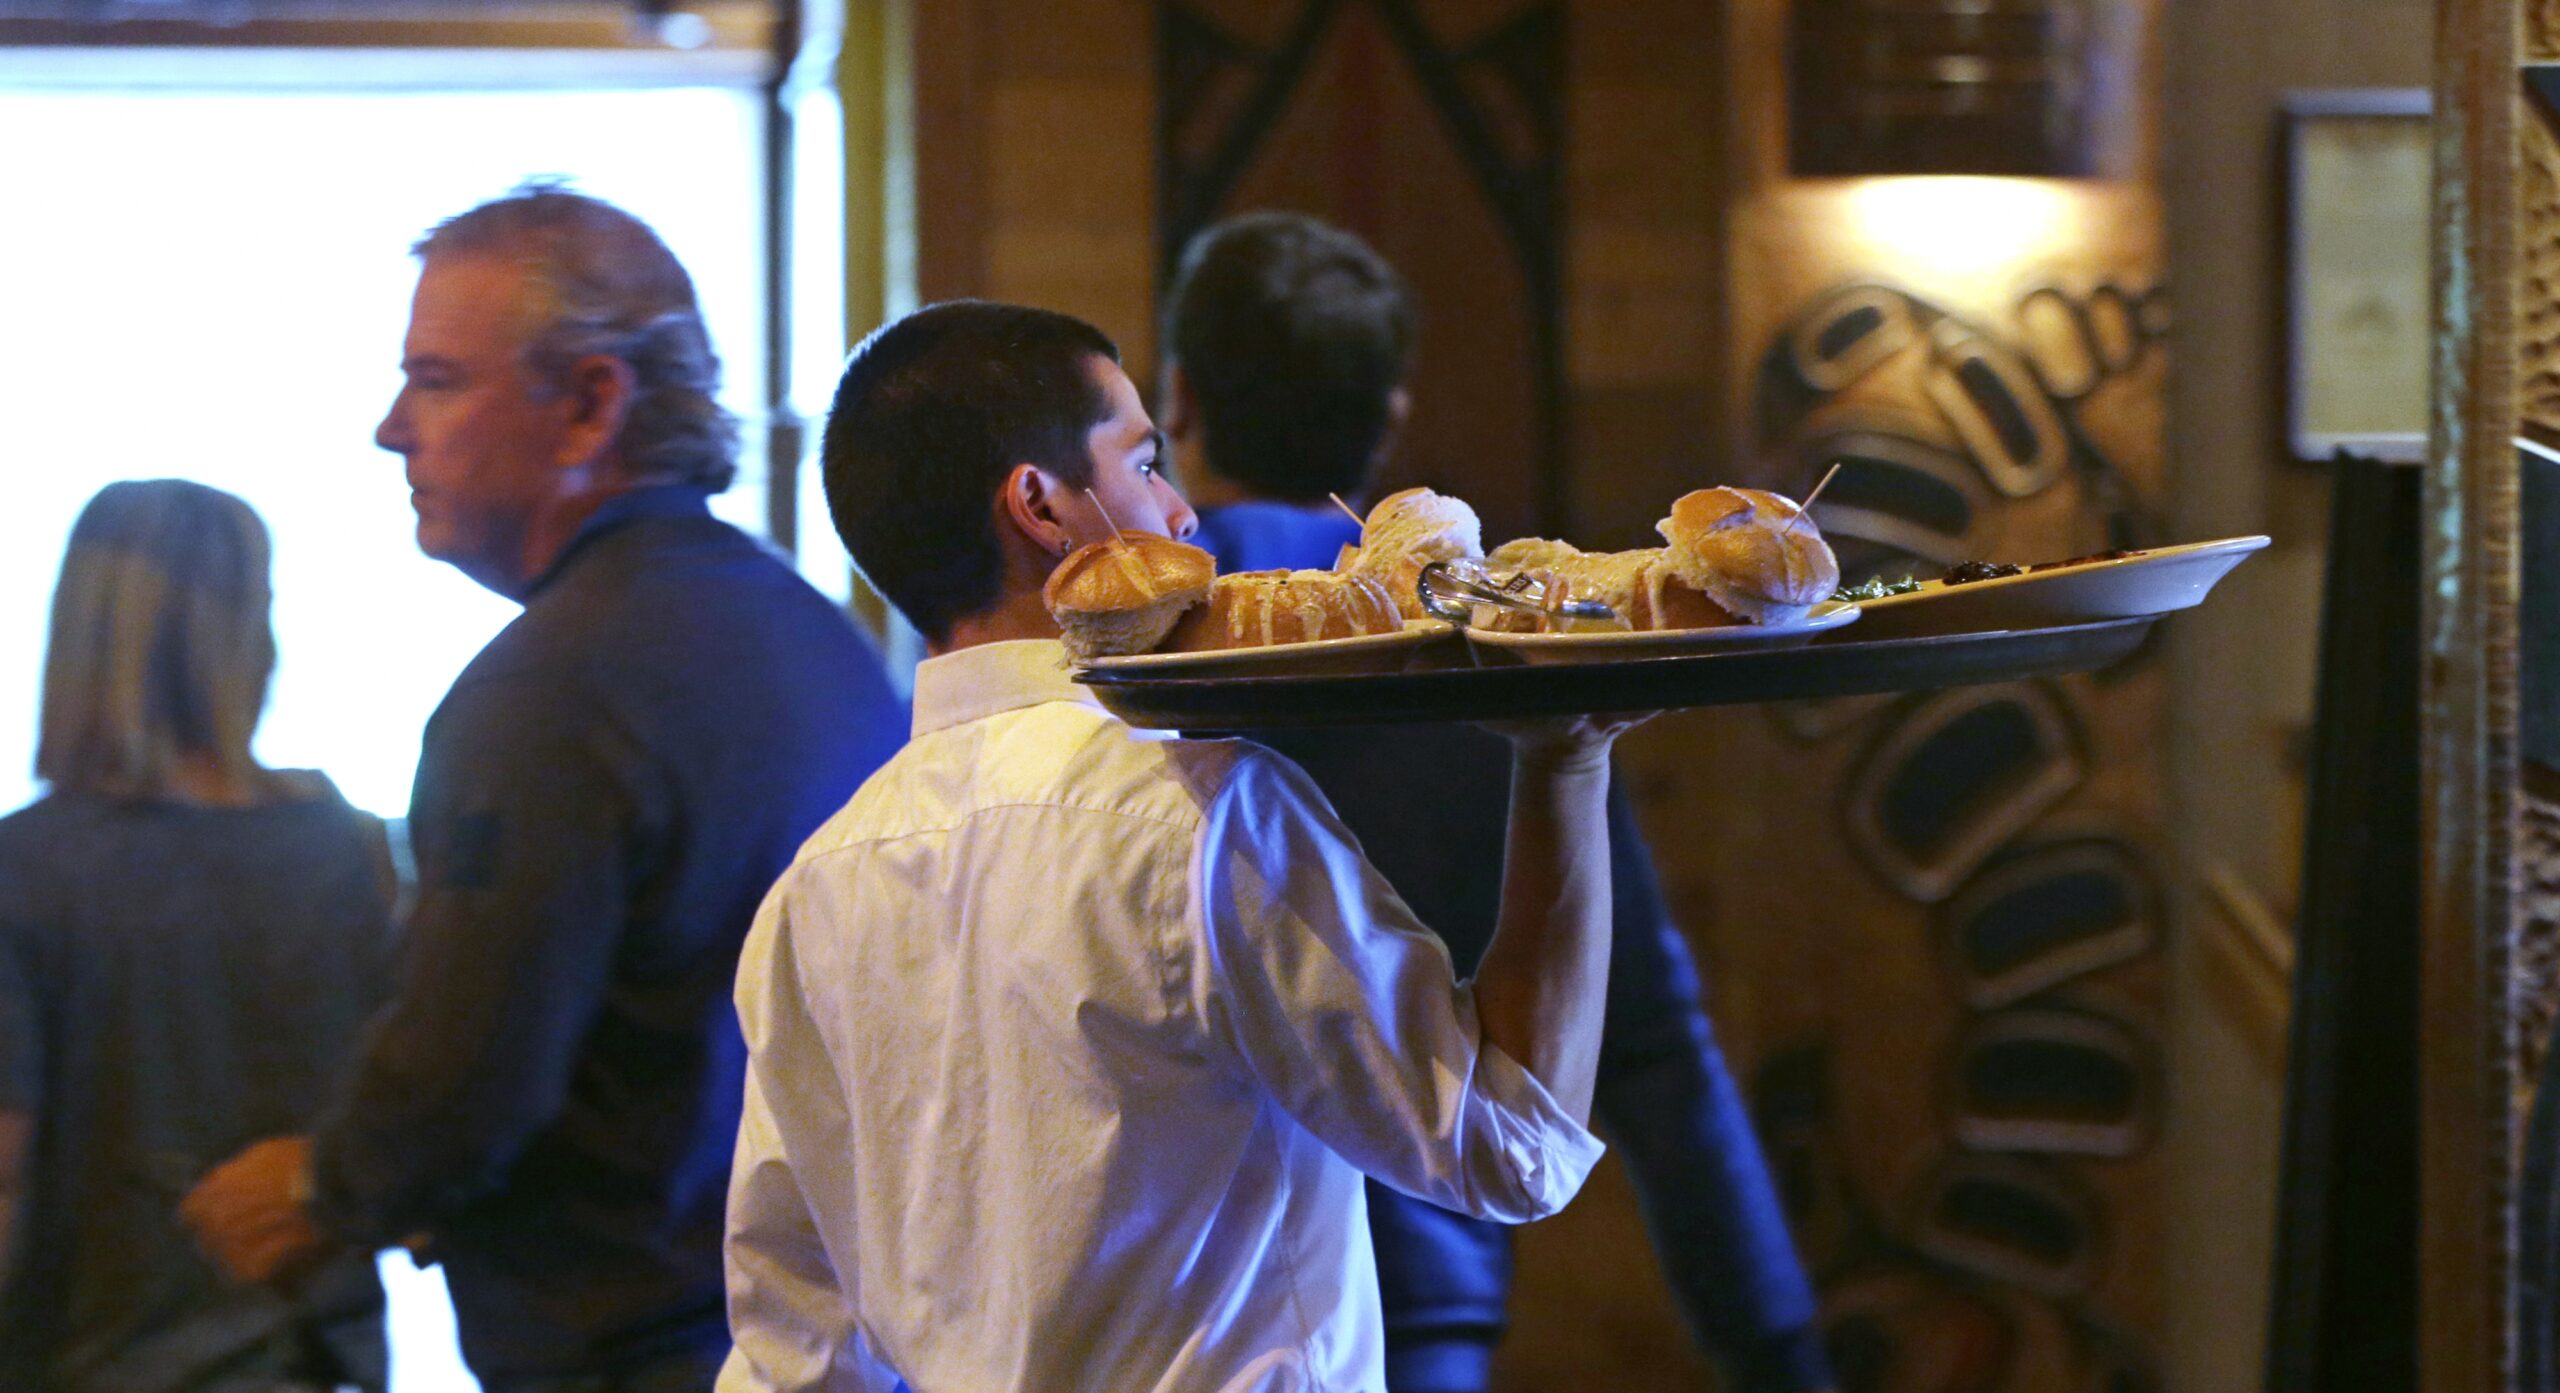 Server Zachary DeYoung carries a tray of food